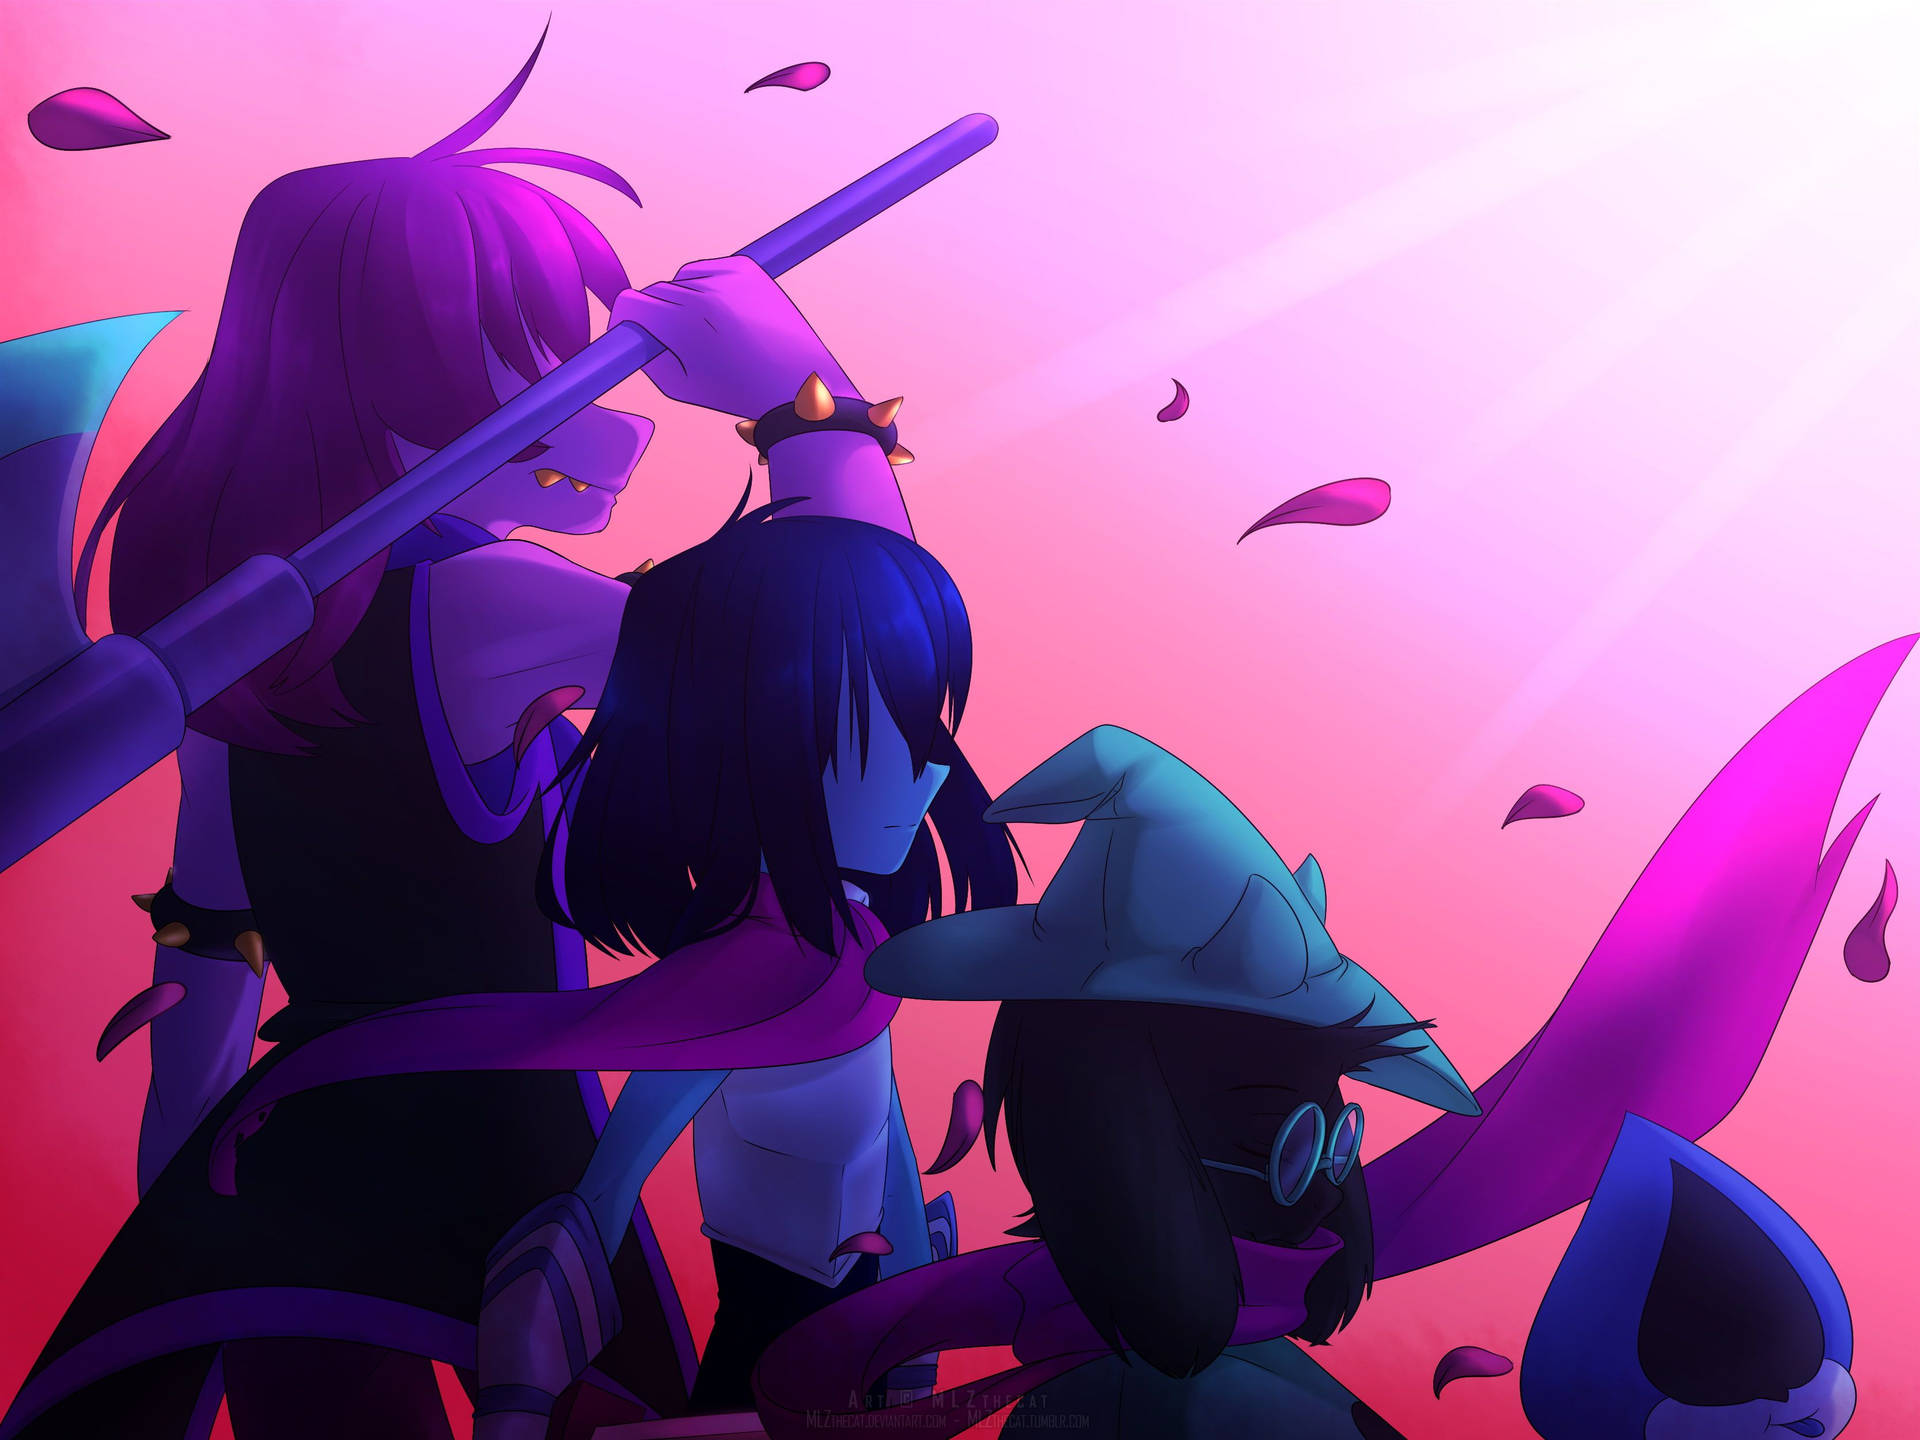 Together in adventure, the five heroes of Deltarune look up to the night sky. Wallpaper